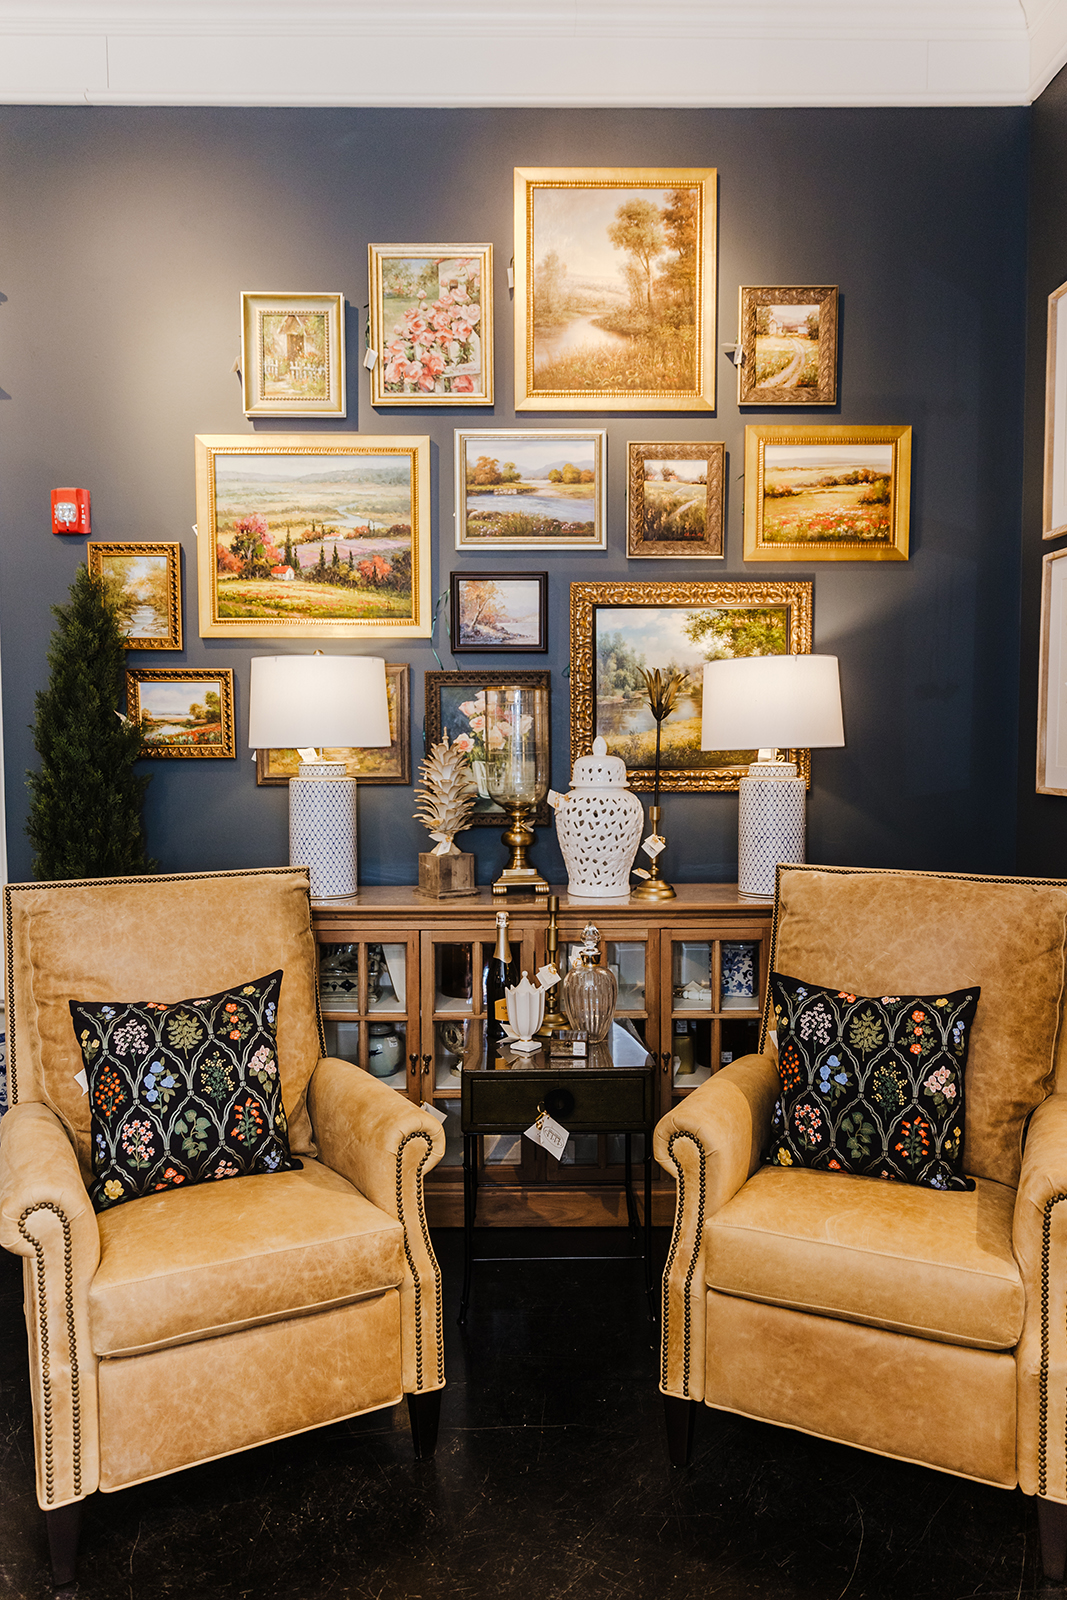 Two stately buttery leather chairs flank a gallery wall. (Handout/TNS)